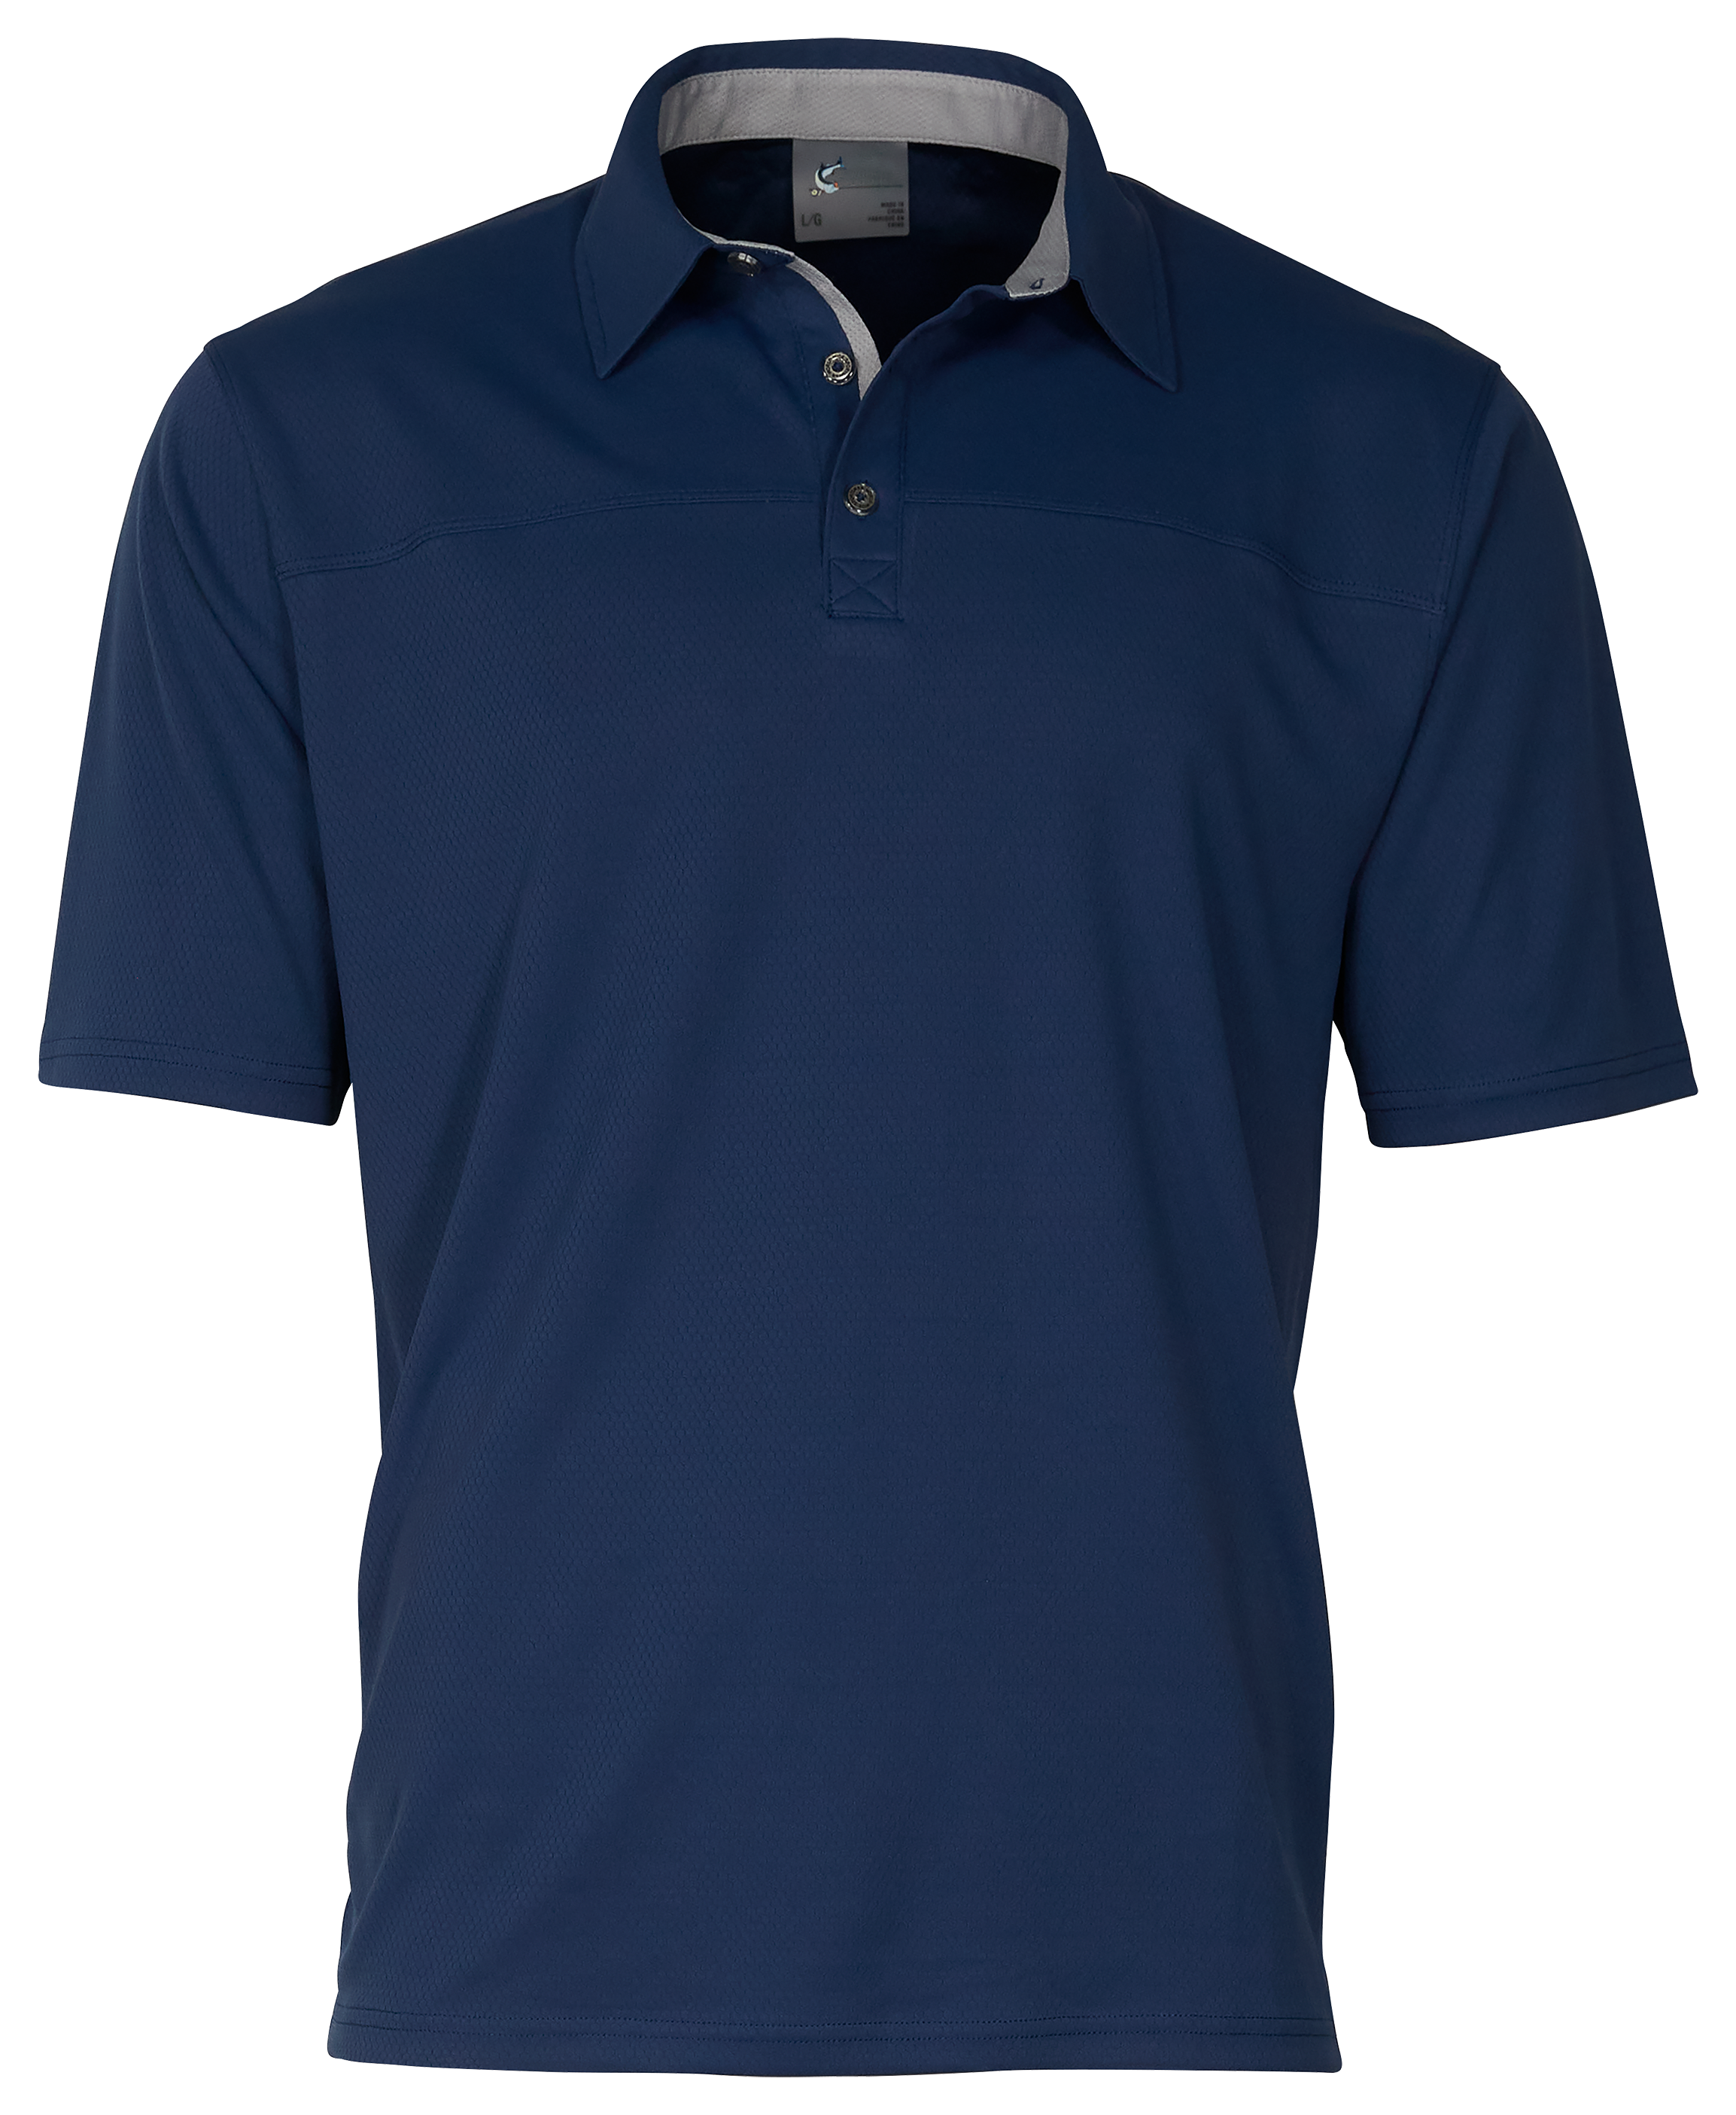 World Wide Sportsman Short-Sleeve Polo for Men - Insignia Blue - M